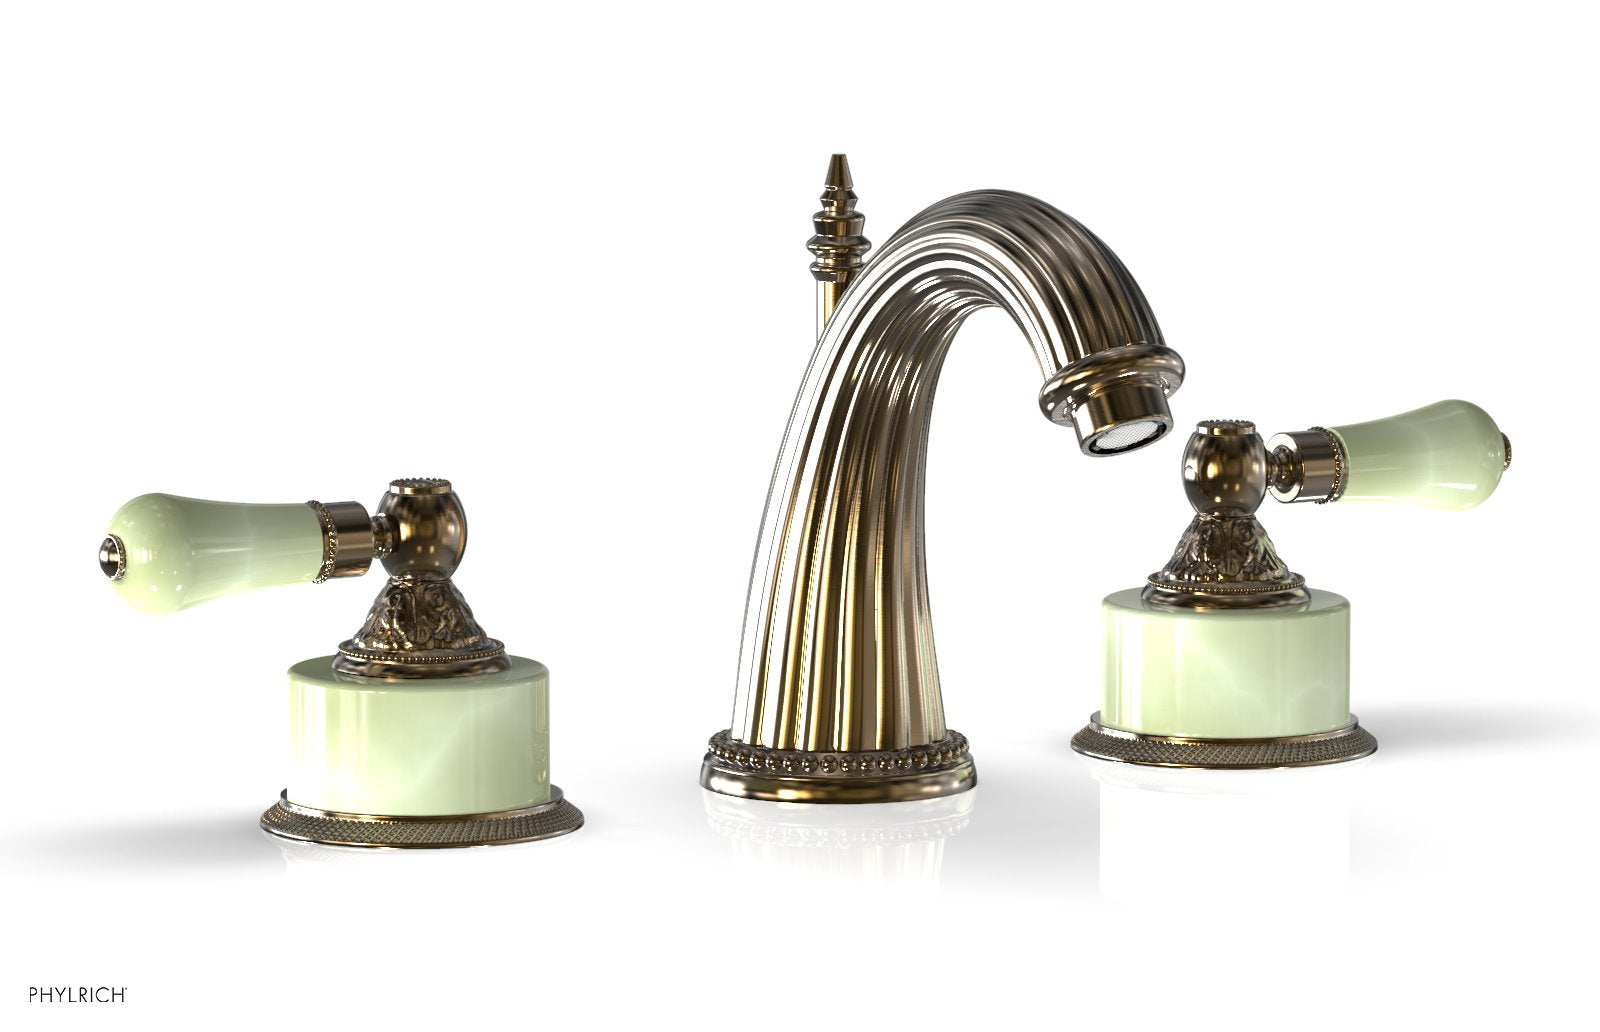 Phylrich VERSAILLES Widespread Faucet - Green Onyx